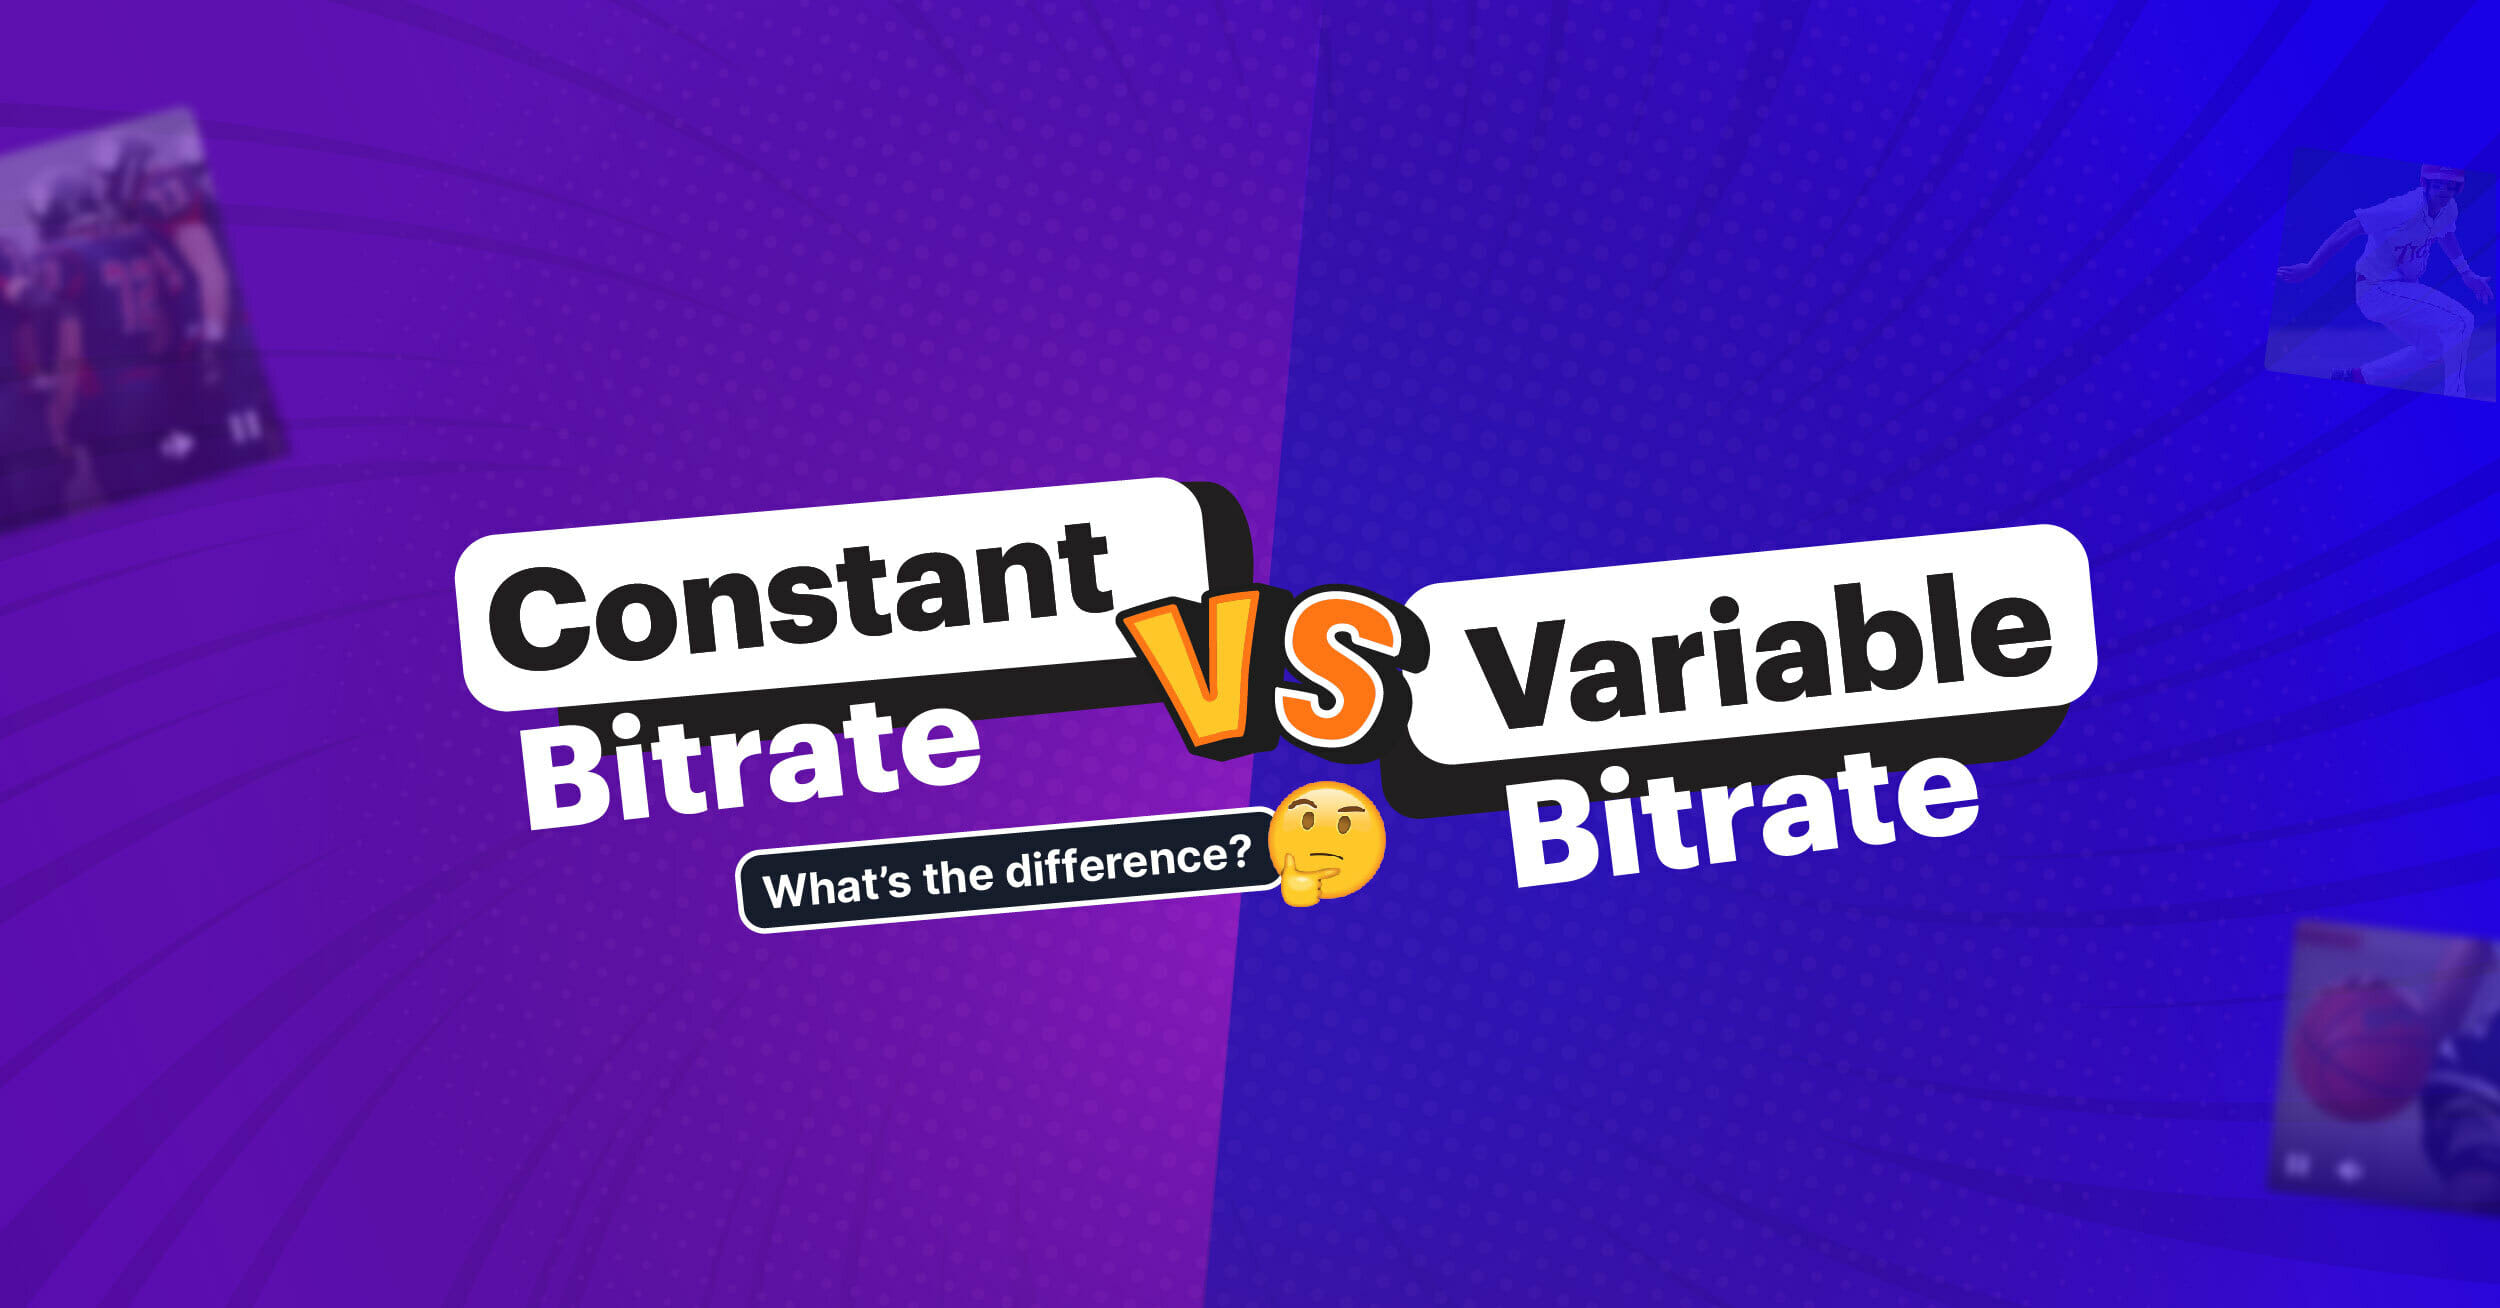 CBR vs VBR: A Comparison Between Constant Bitrate and Variable Bitrate